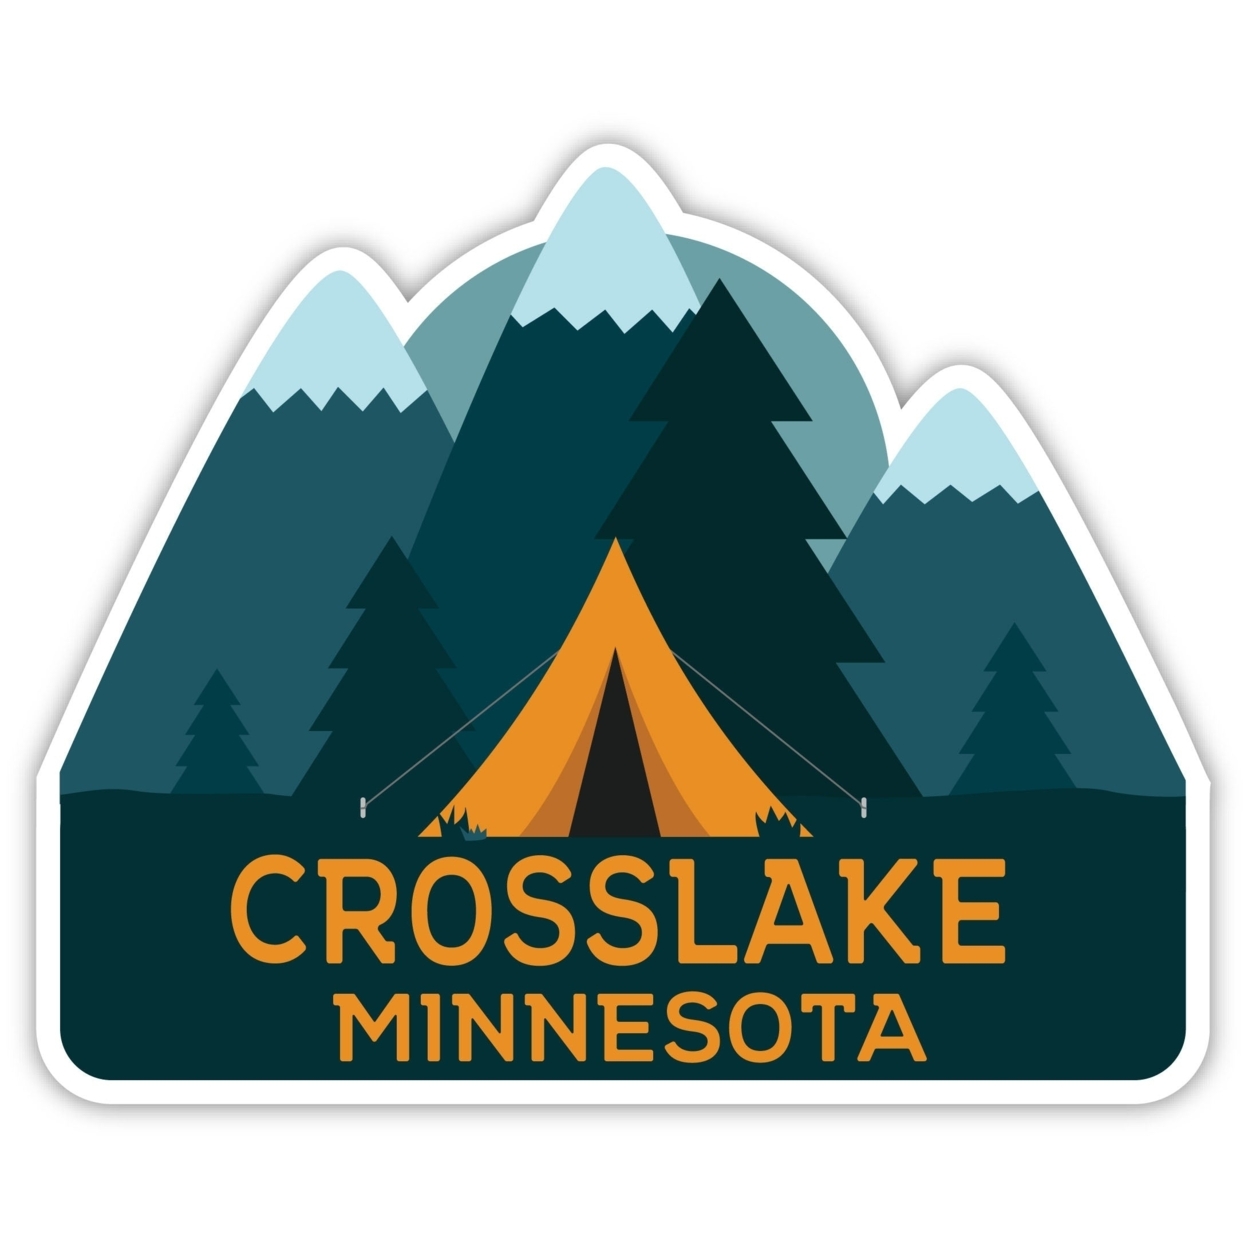 Crosslake Minnesota Souvenir Decorative Stickers (Choose Theme And Size) - 4-Pack, 12-Inch, Tent